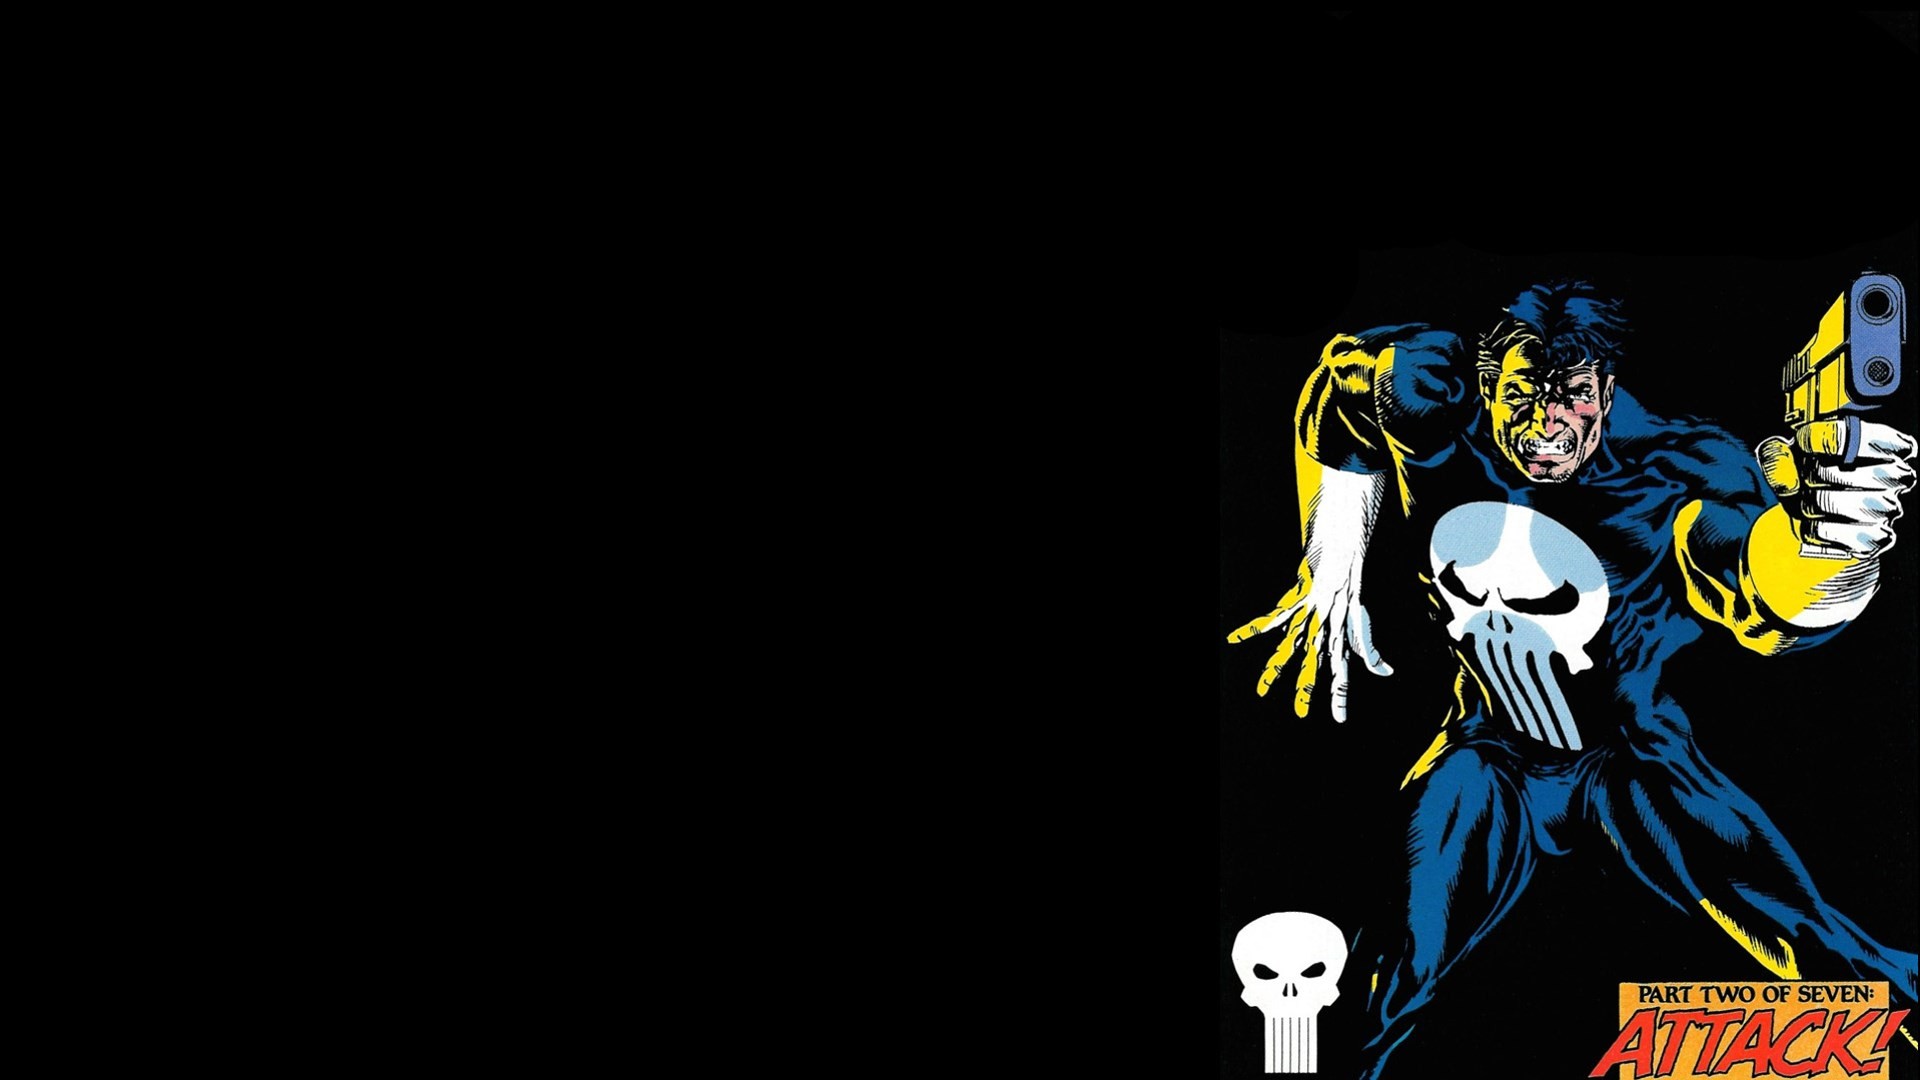 1920x1080 the punisher backgrounds for desktop hd backgrounds by Clarissa Nail  (2017-03-28)